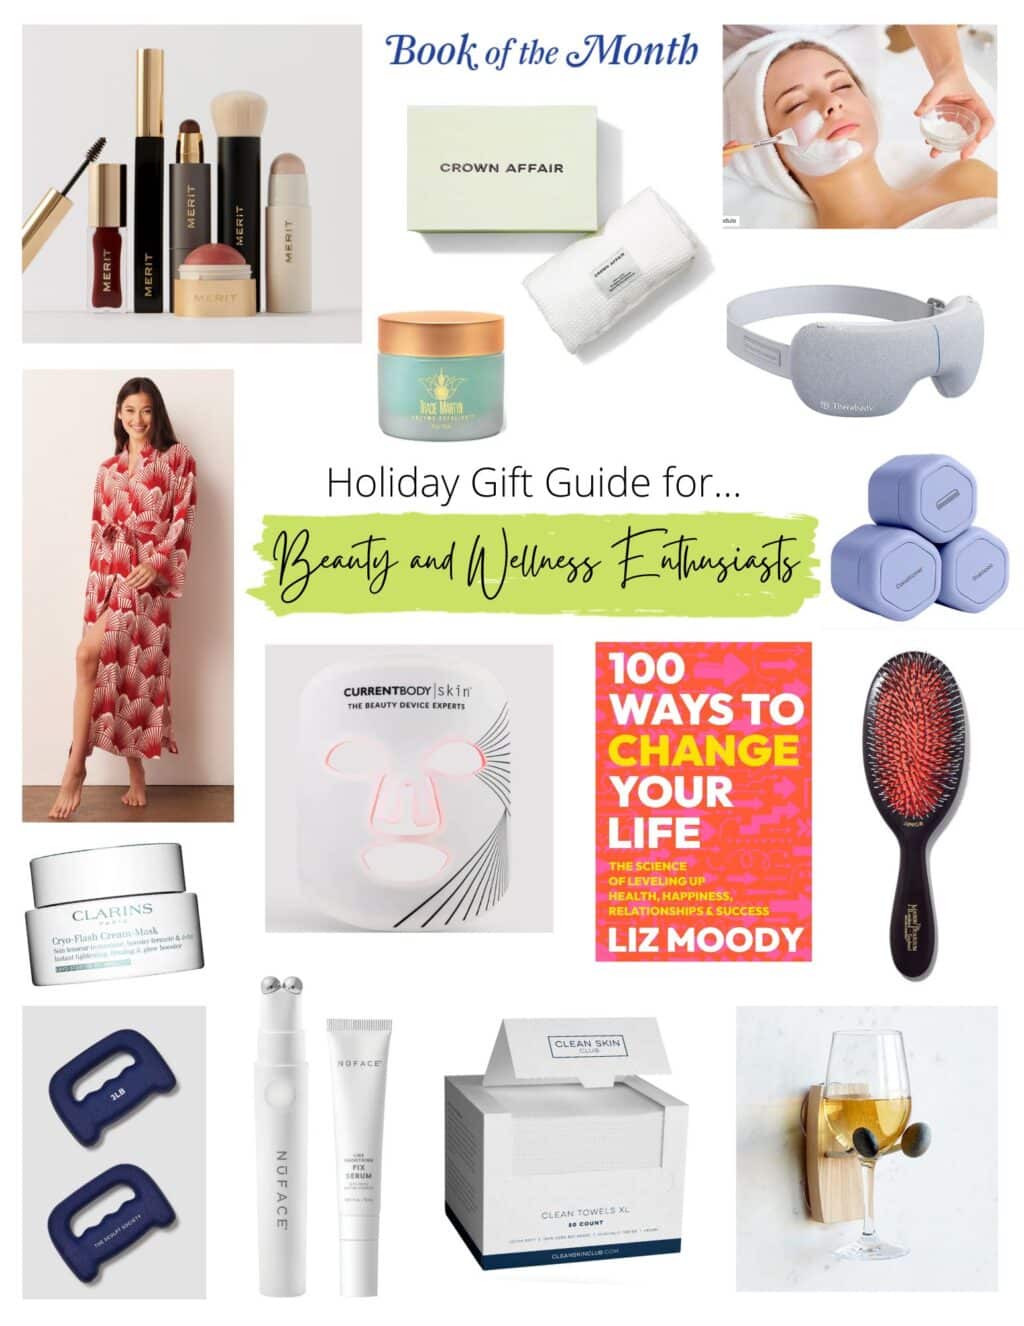 Collaged images of beauty and wellness gift ideas.